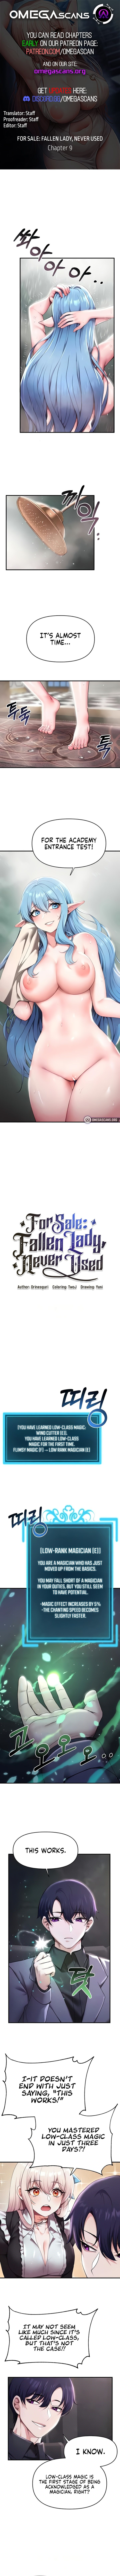 For Sale: Fallen Lady, Never Used - Chapter 9 Page 1